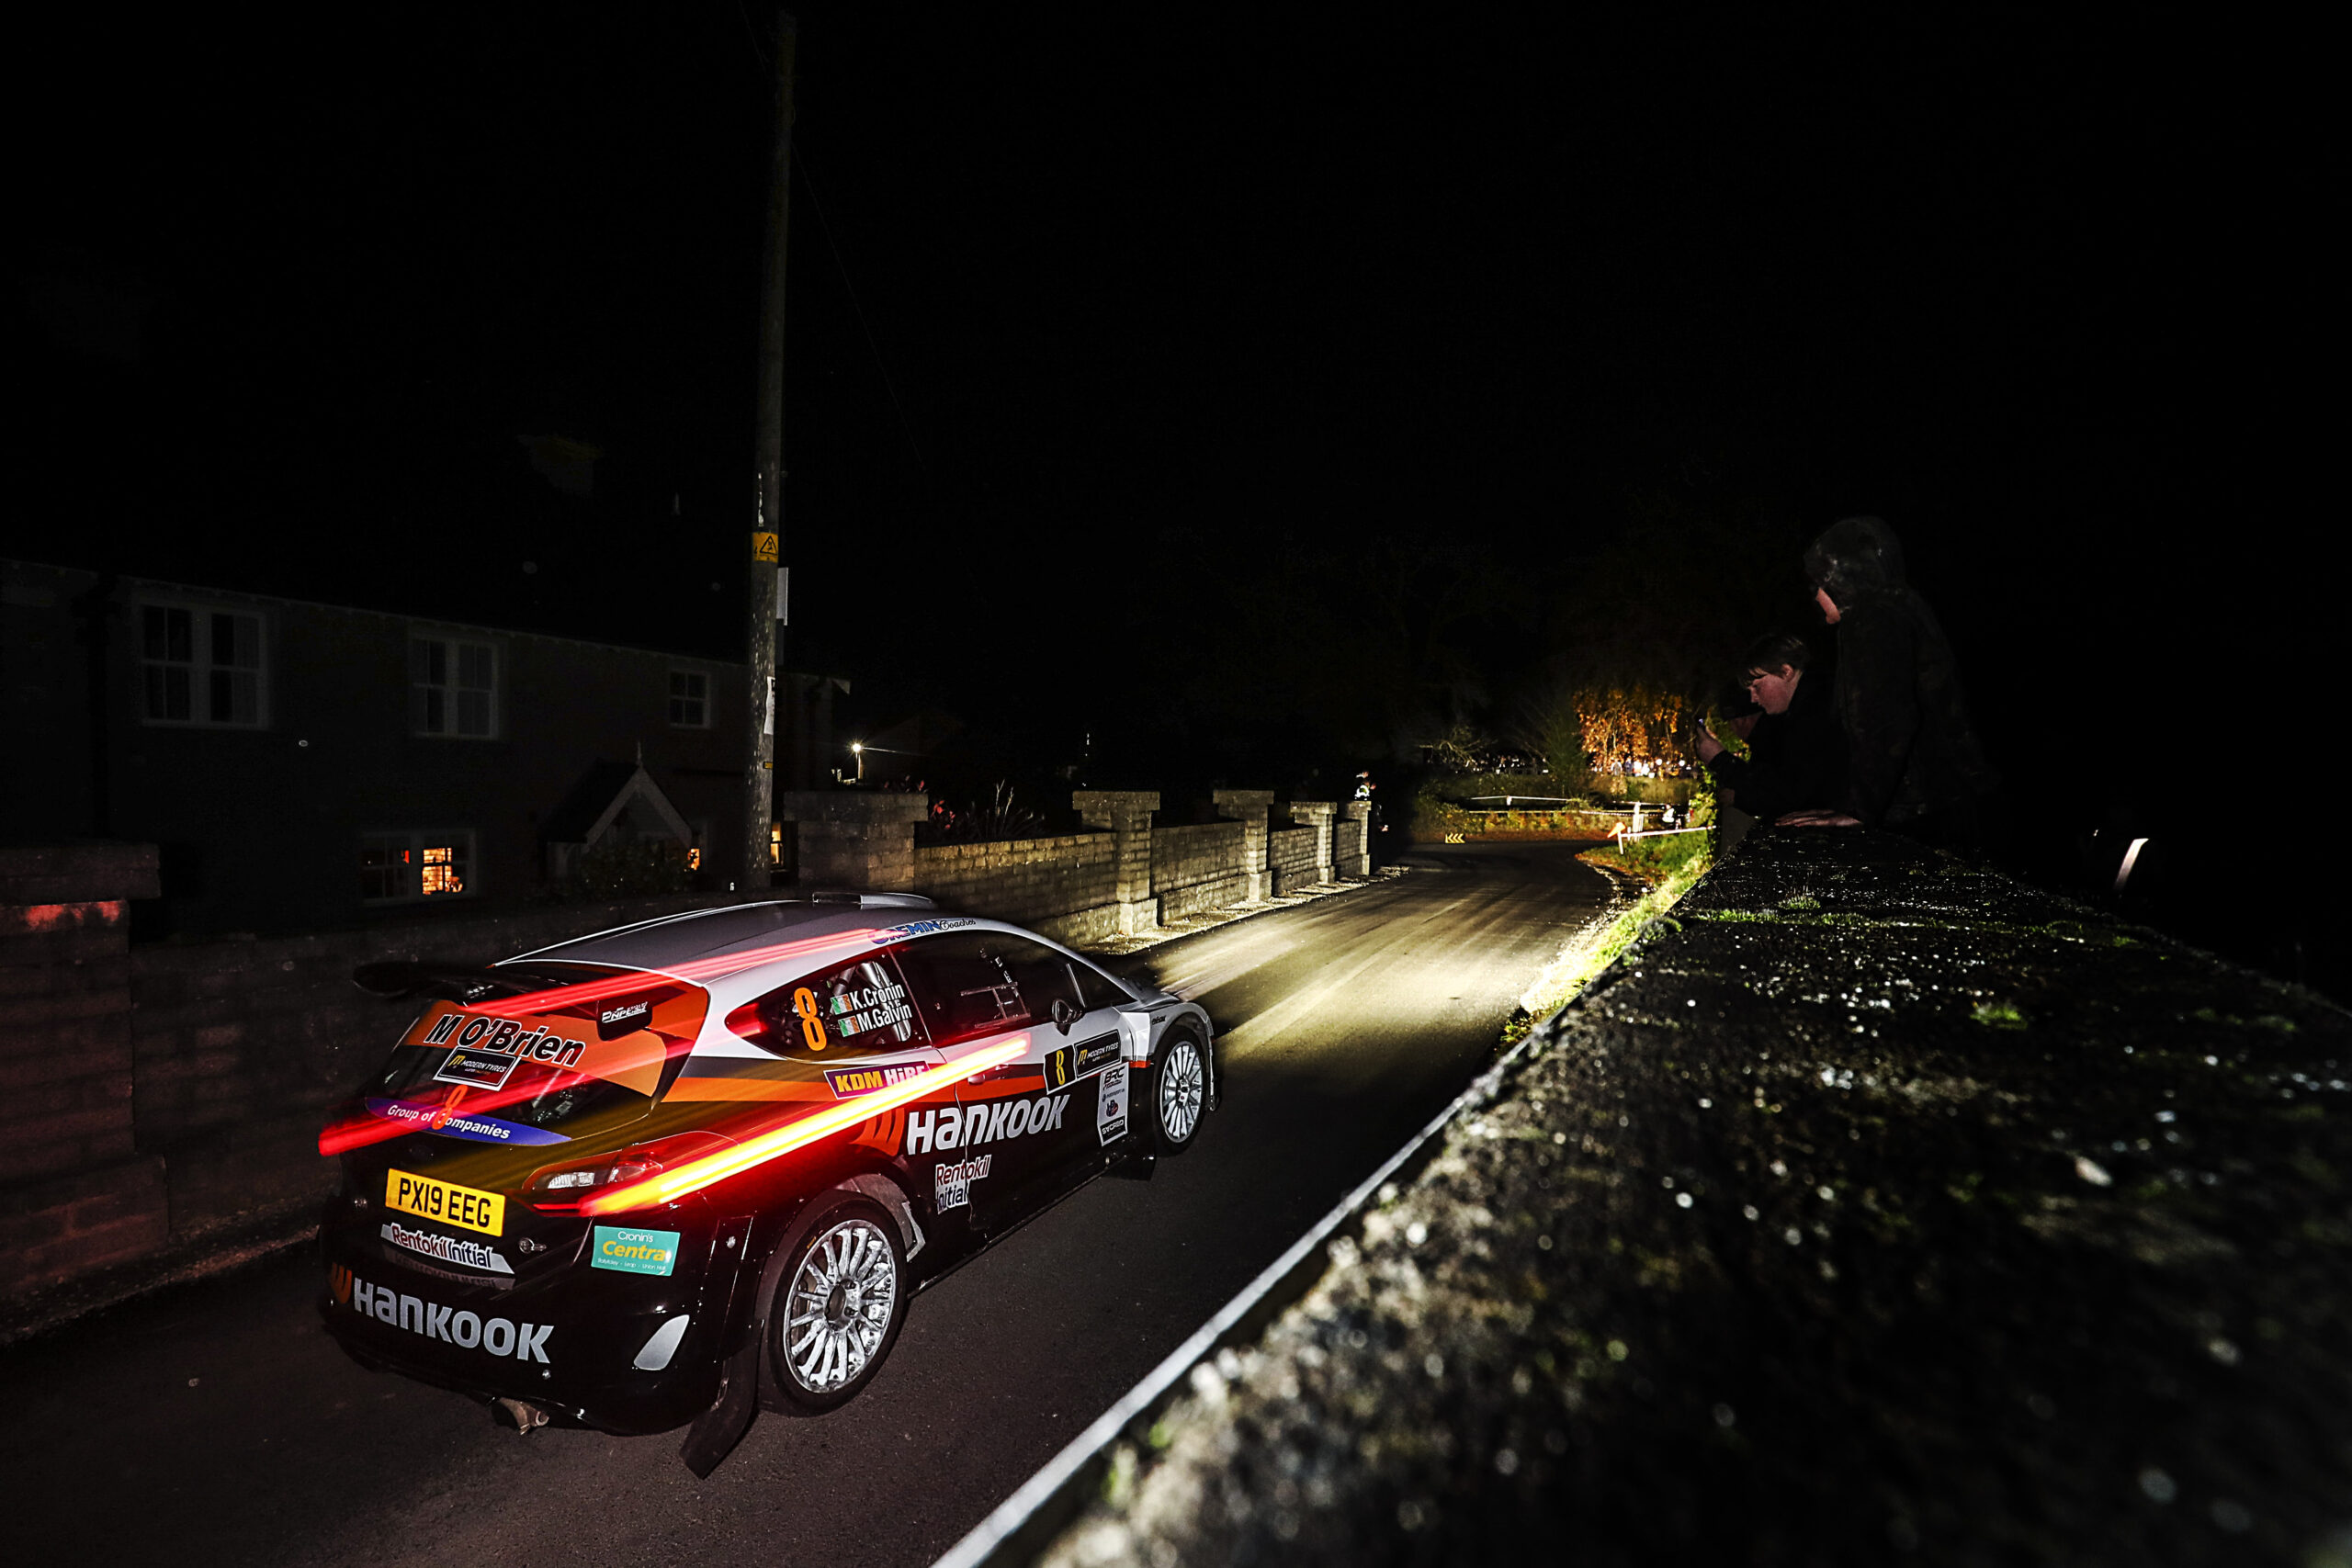 NIGHT STAGE RETURNS AS PART OF RE-JIGGED ULSTER RALLY